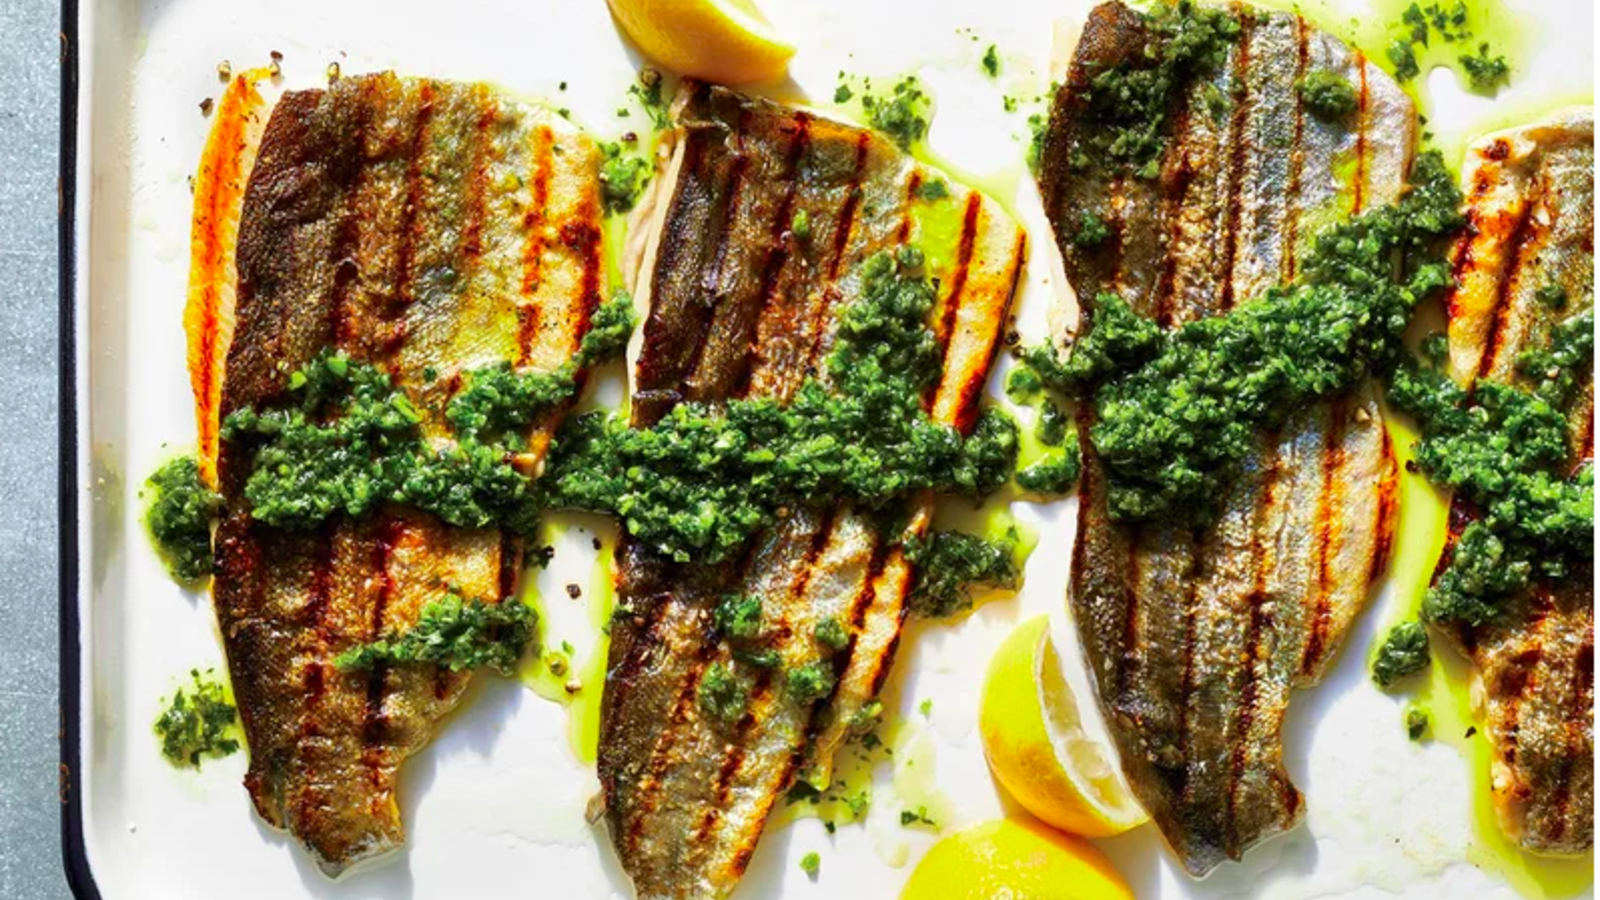 Image of Grilled Rainbow Trout with Chimichurri